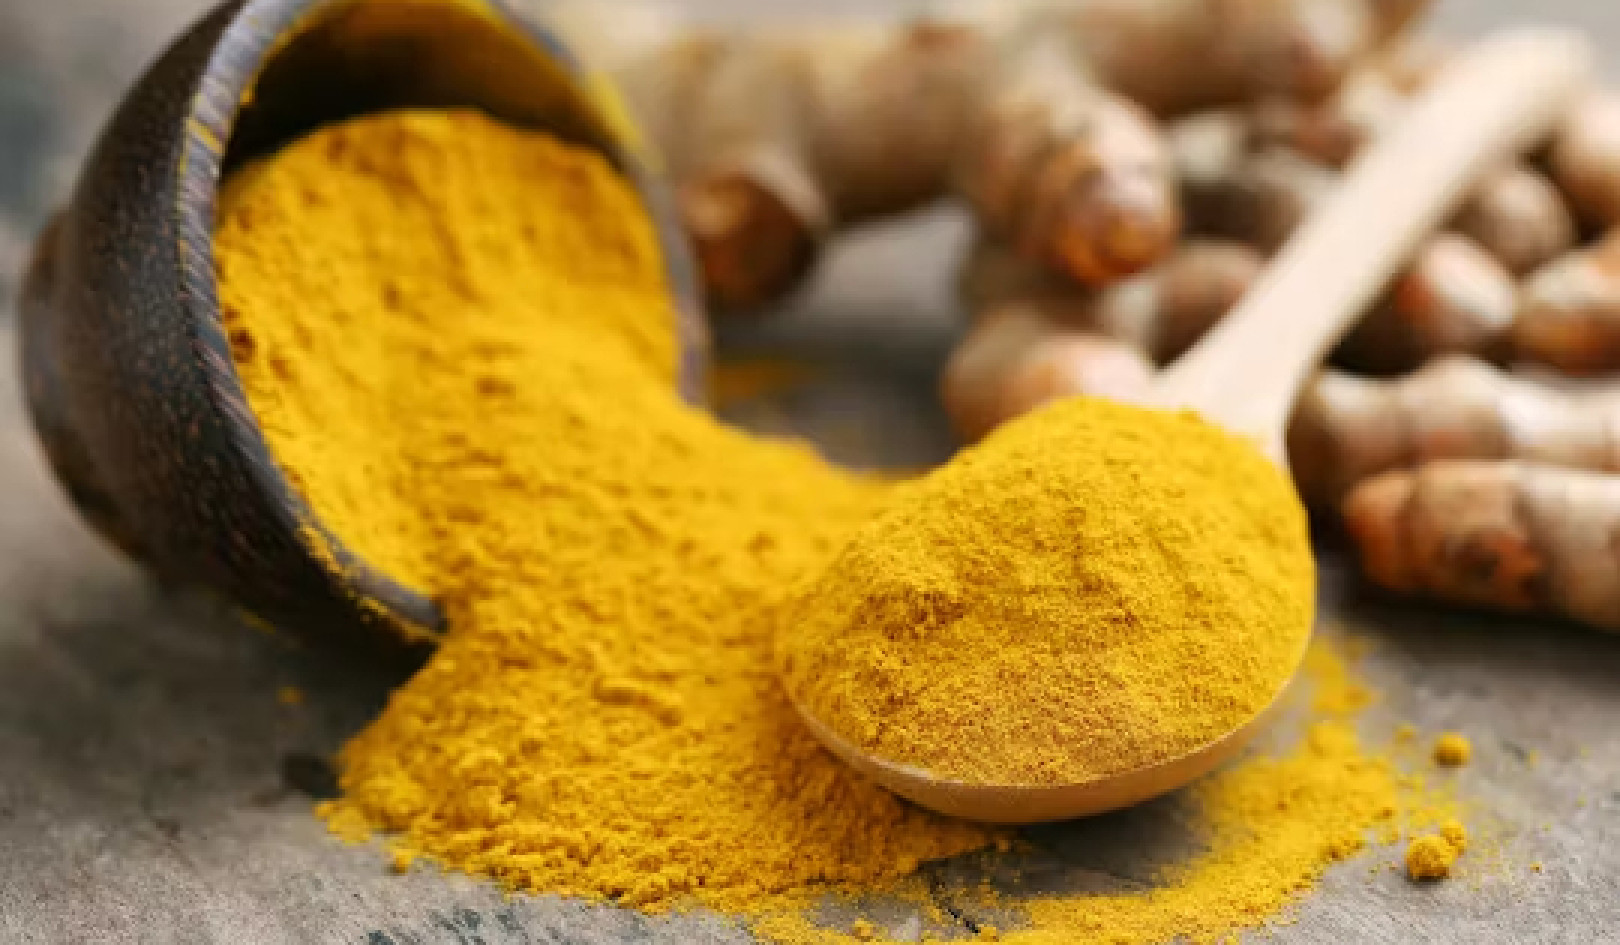 The Truth About Turmeric: Separating Fact from Fiction for Health Benefits